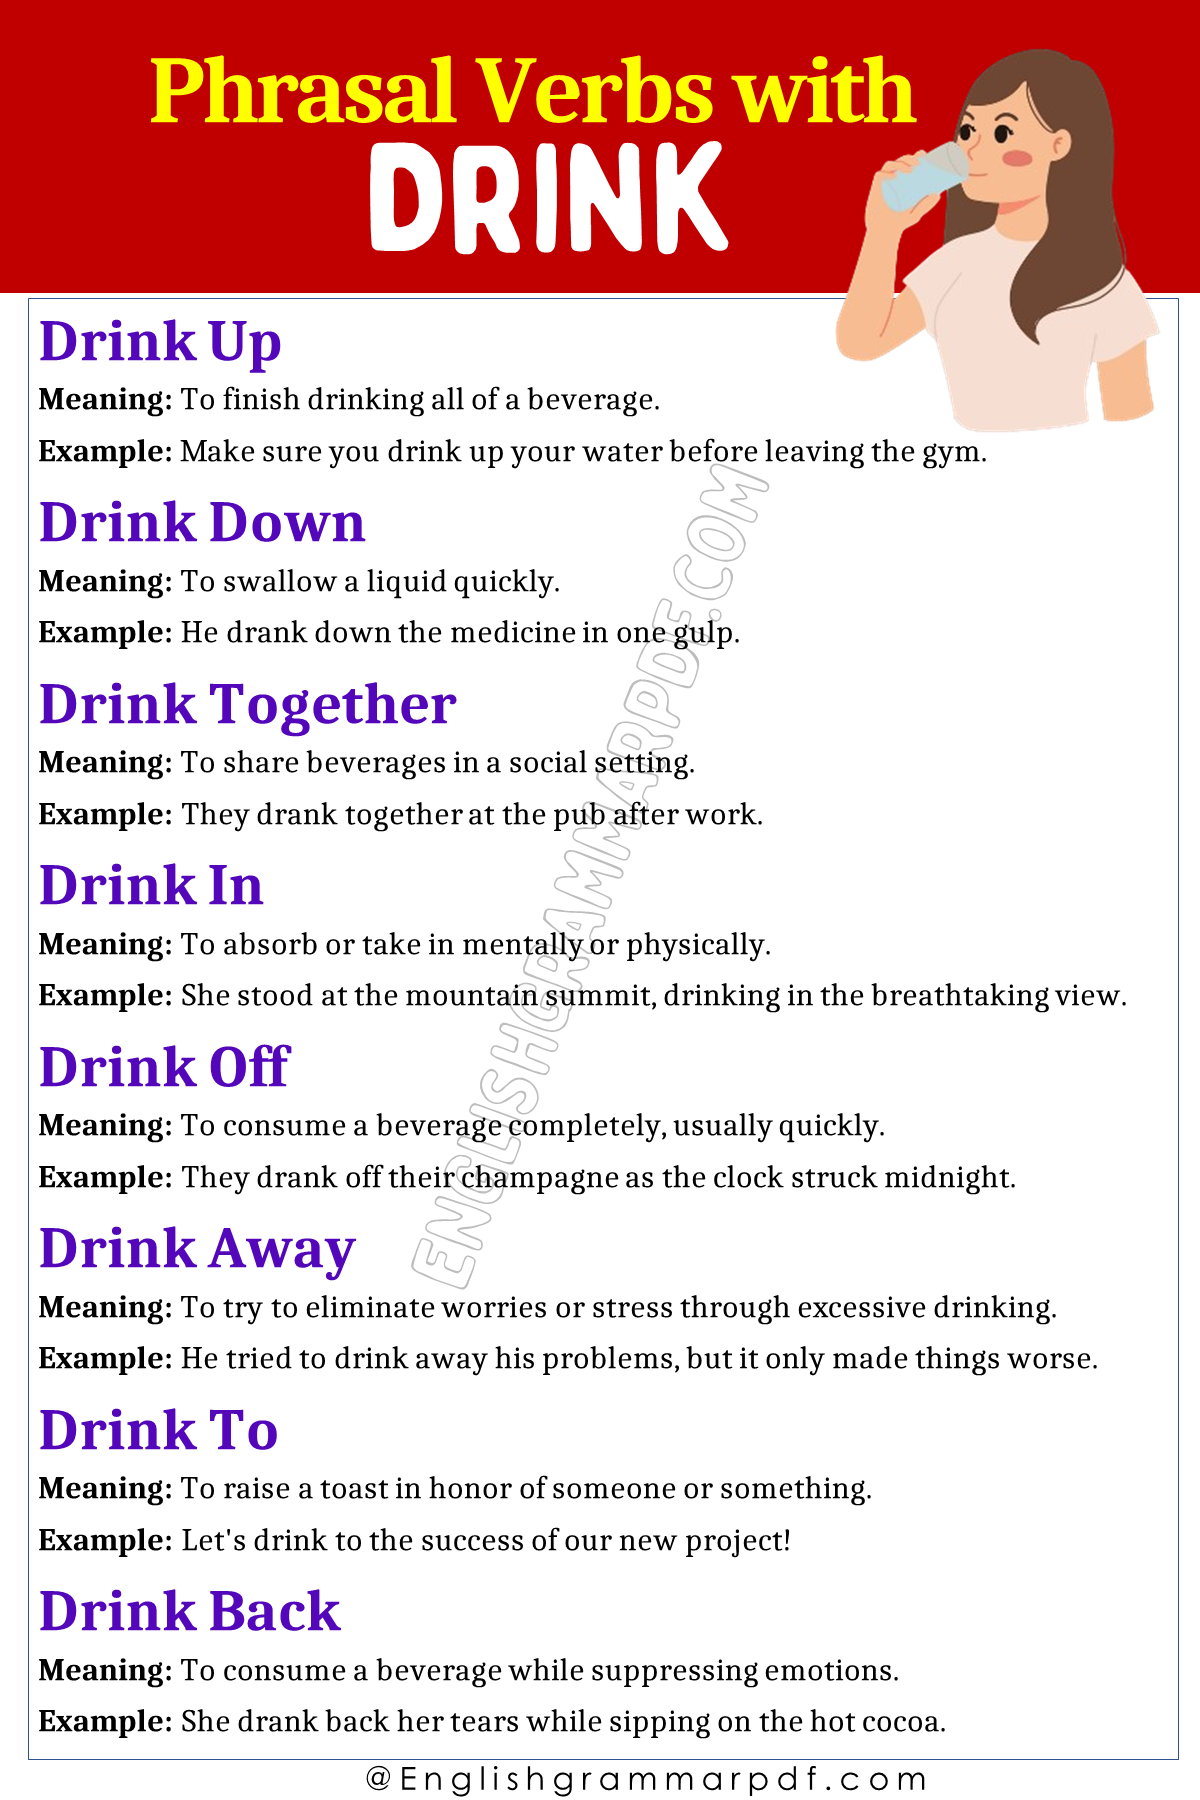 Phrasal Verbs with Drink